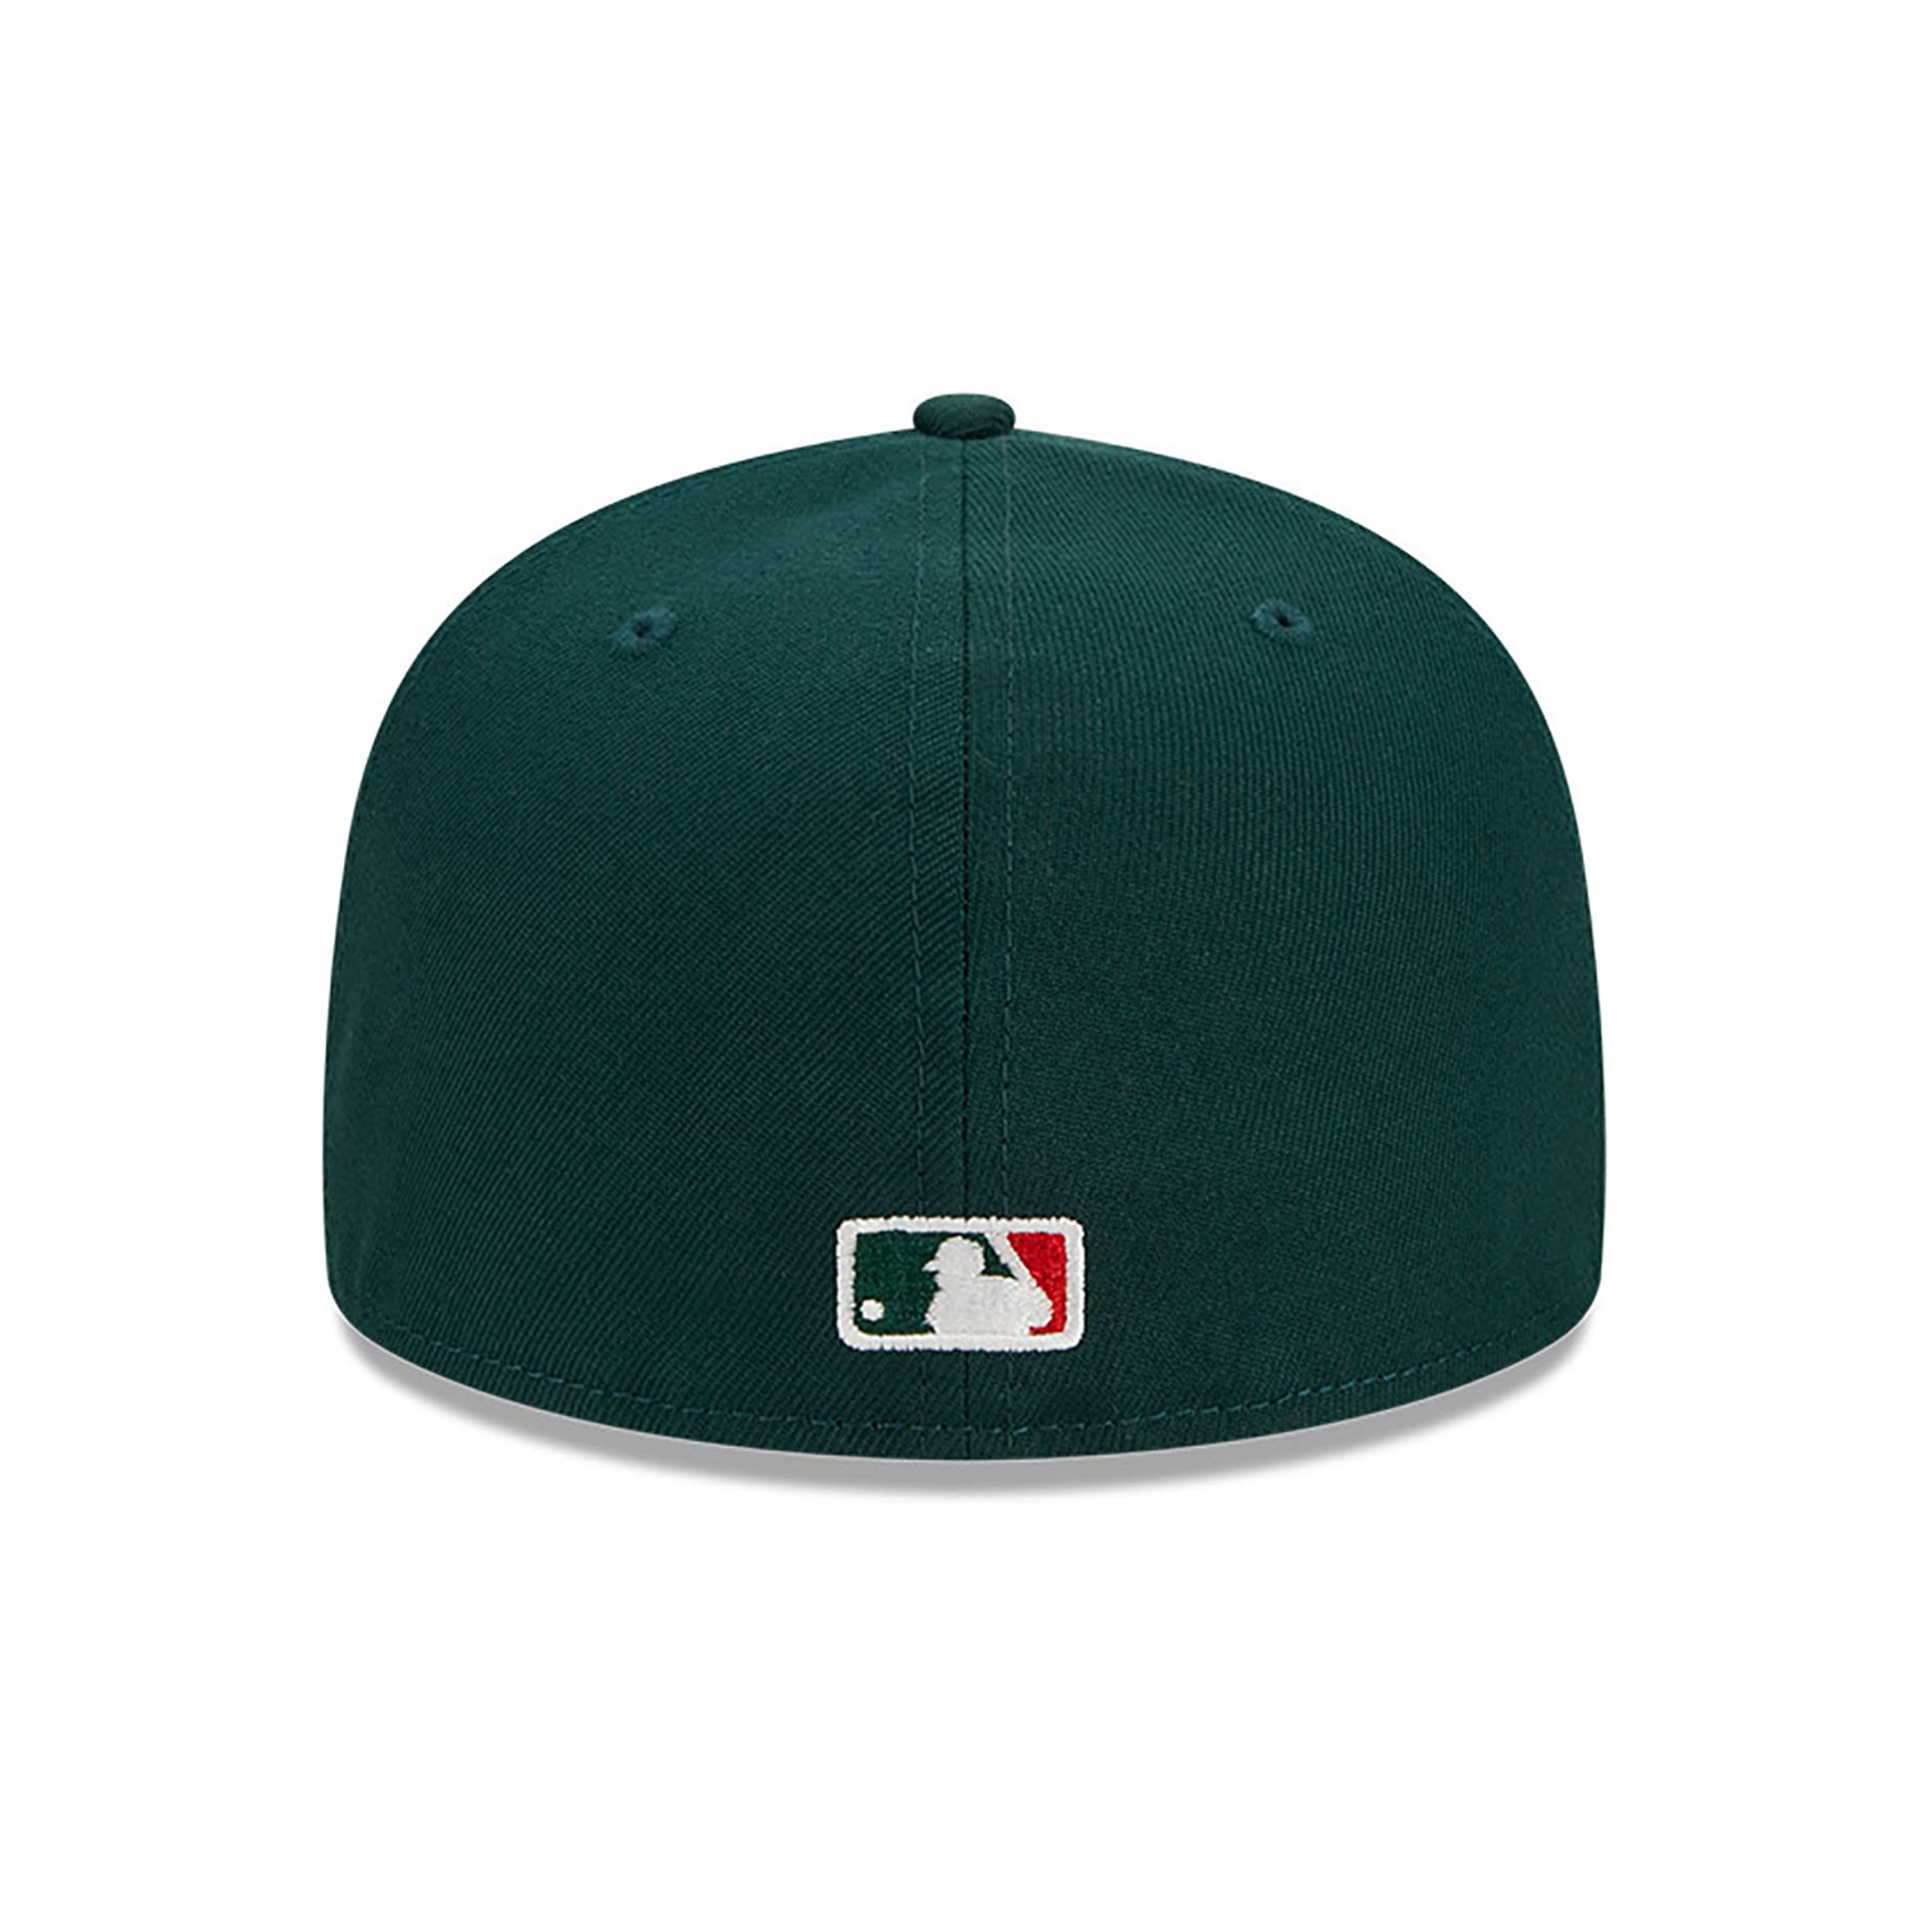 LA Angels Spice Berry Dark Green 59FIFTY Fitted Cap